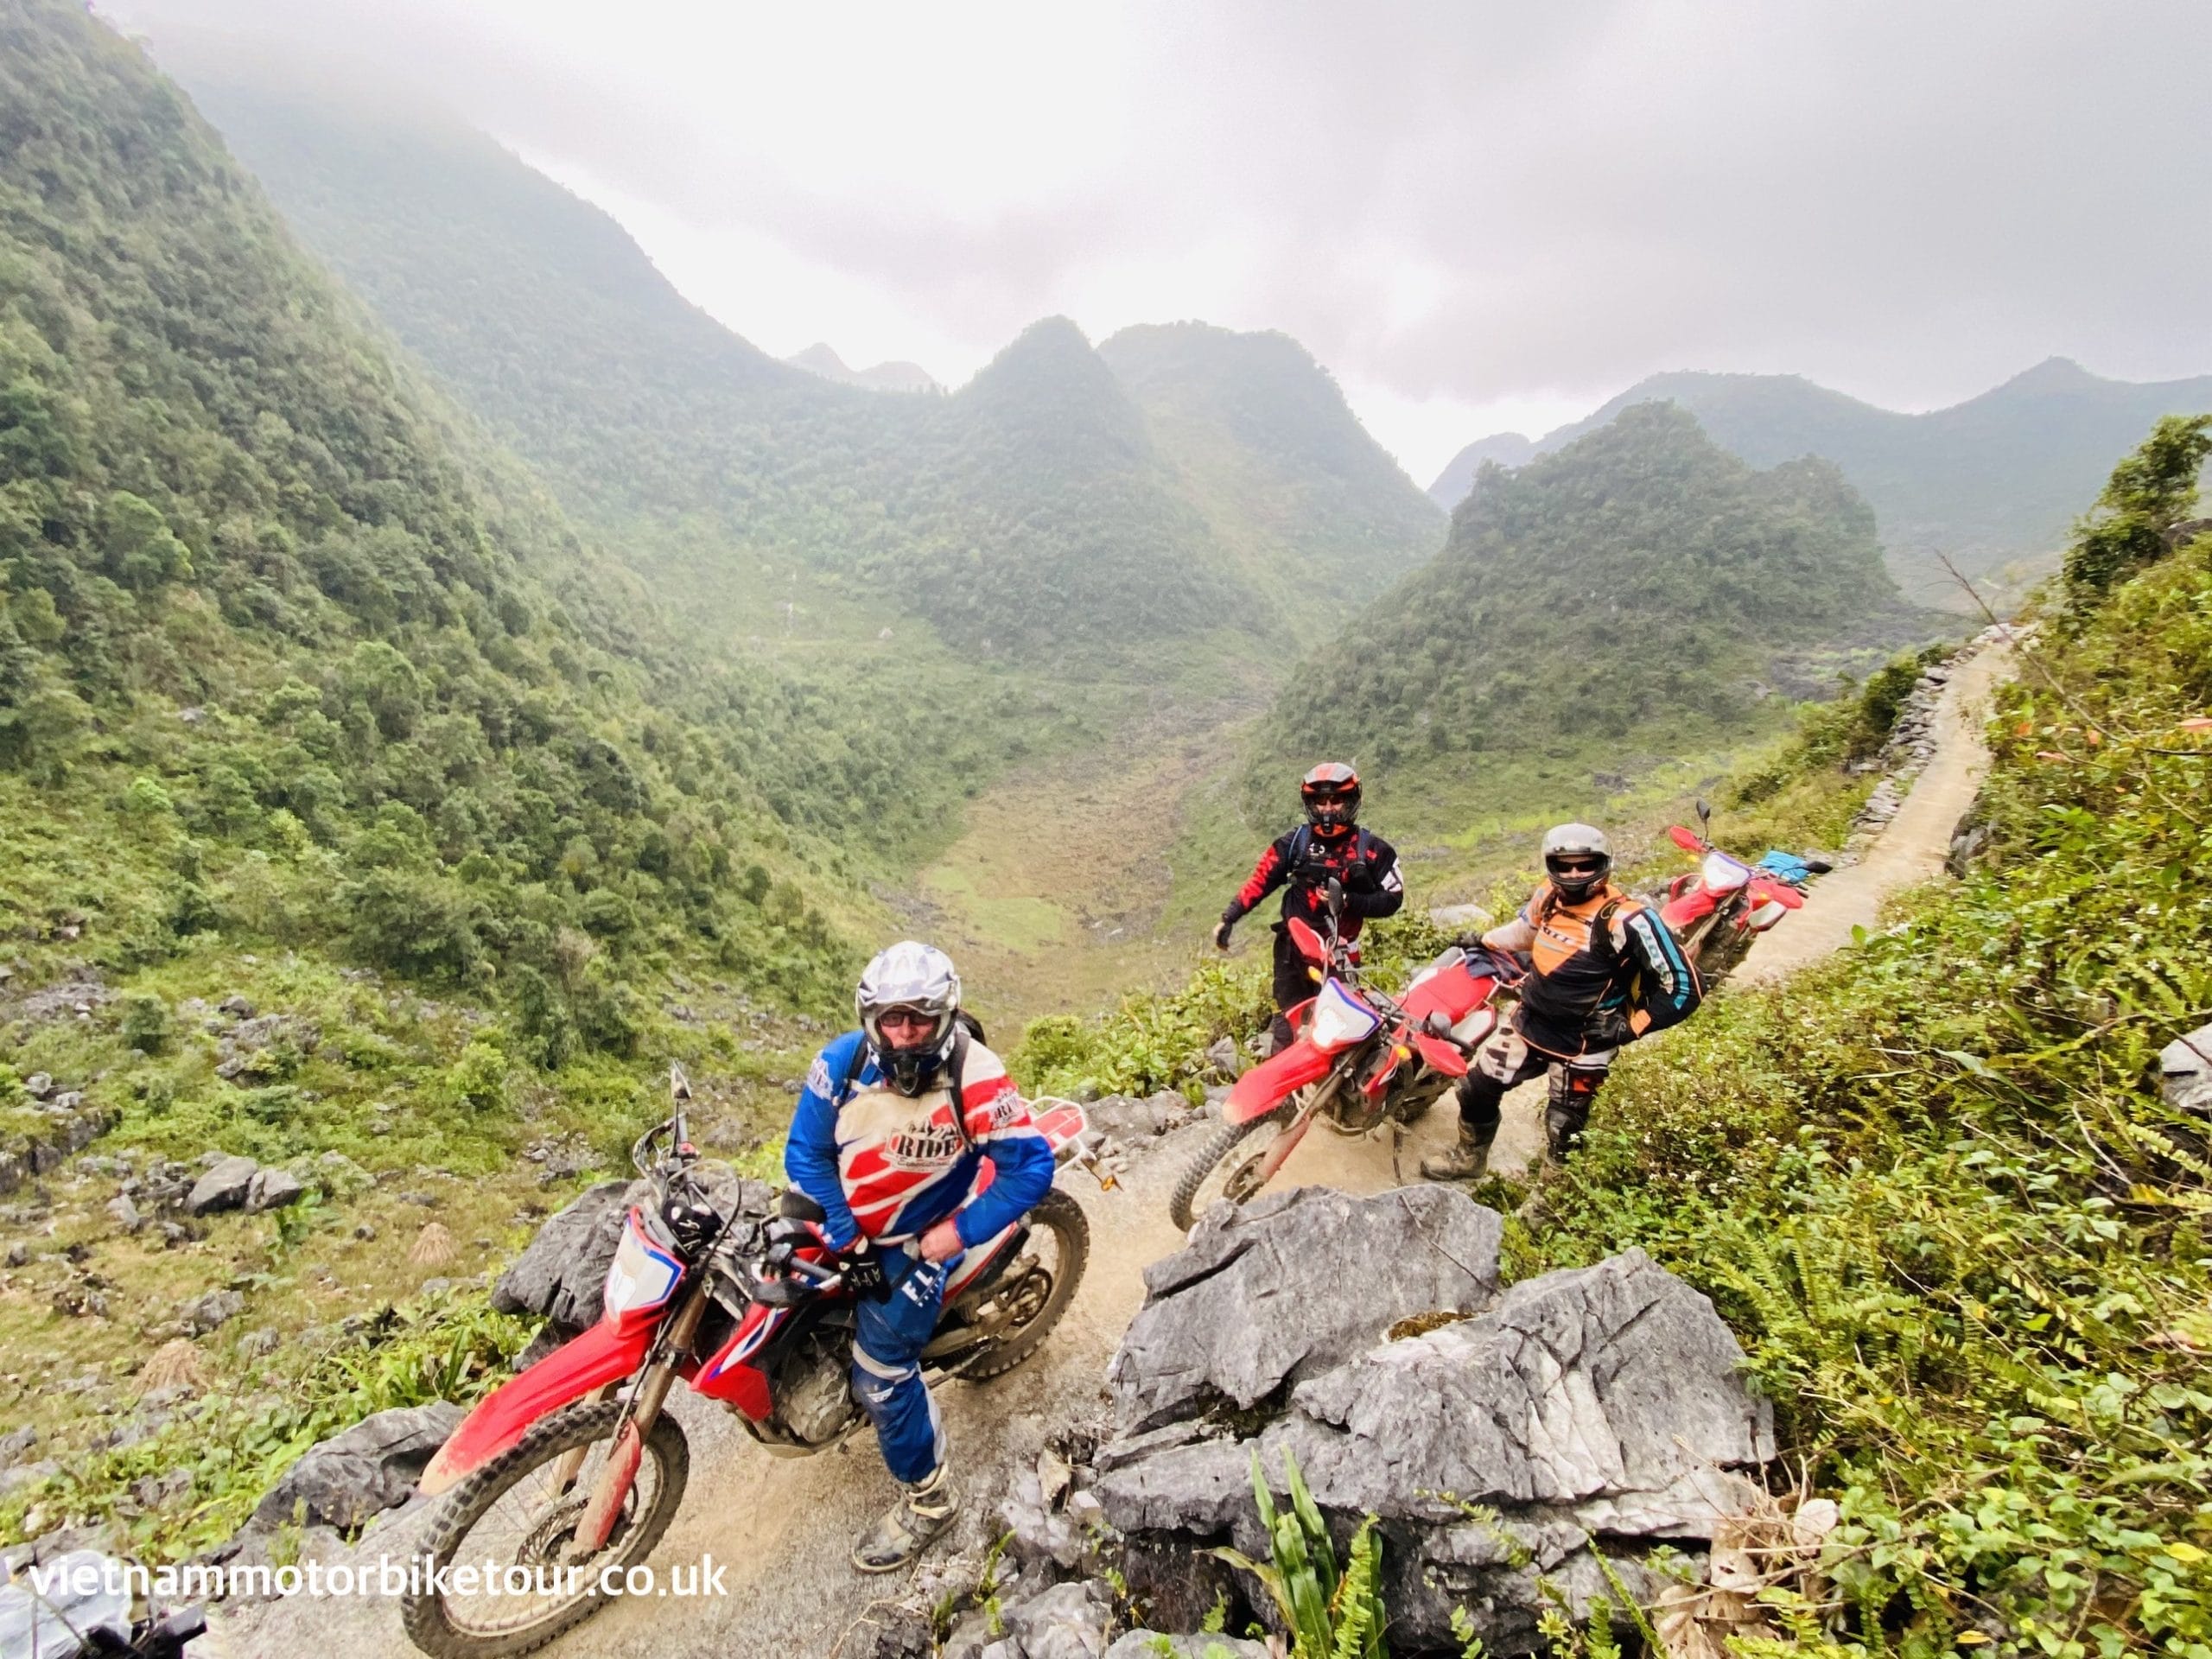 hagiang loop motorbike tours to dong van 8 scaled - What To See While Riding Motorcycles in Ha Giang